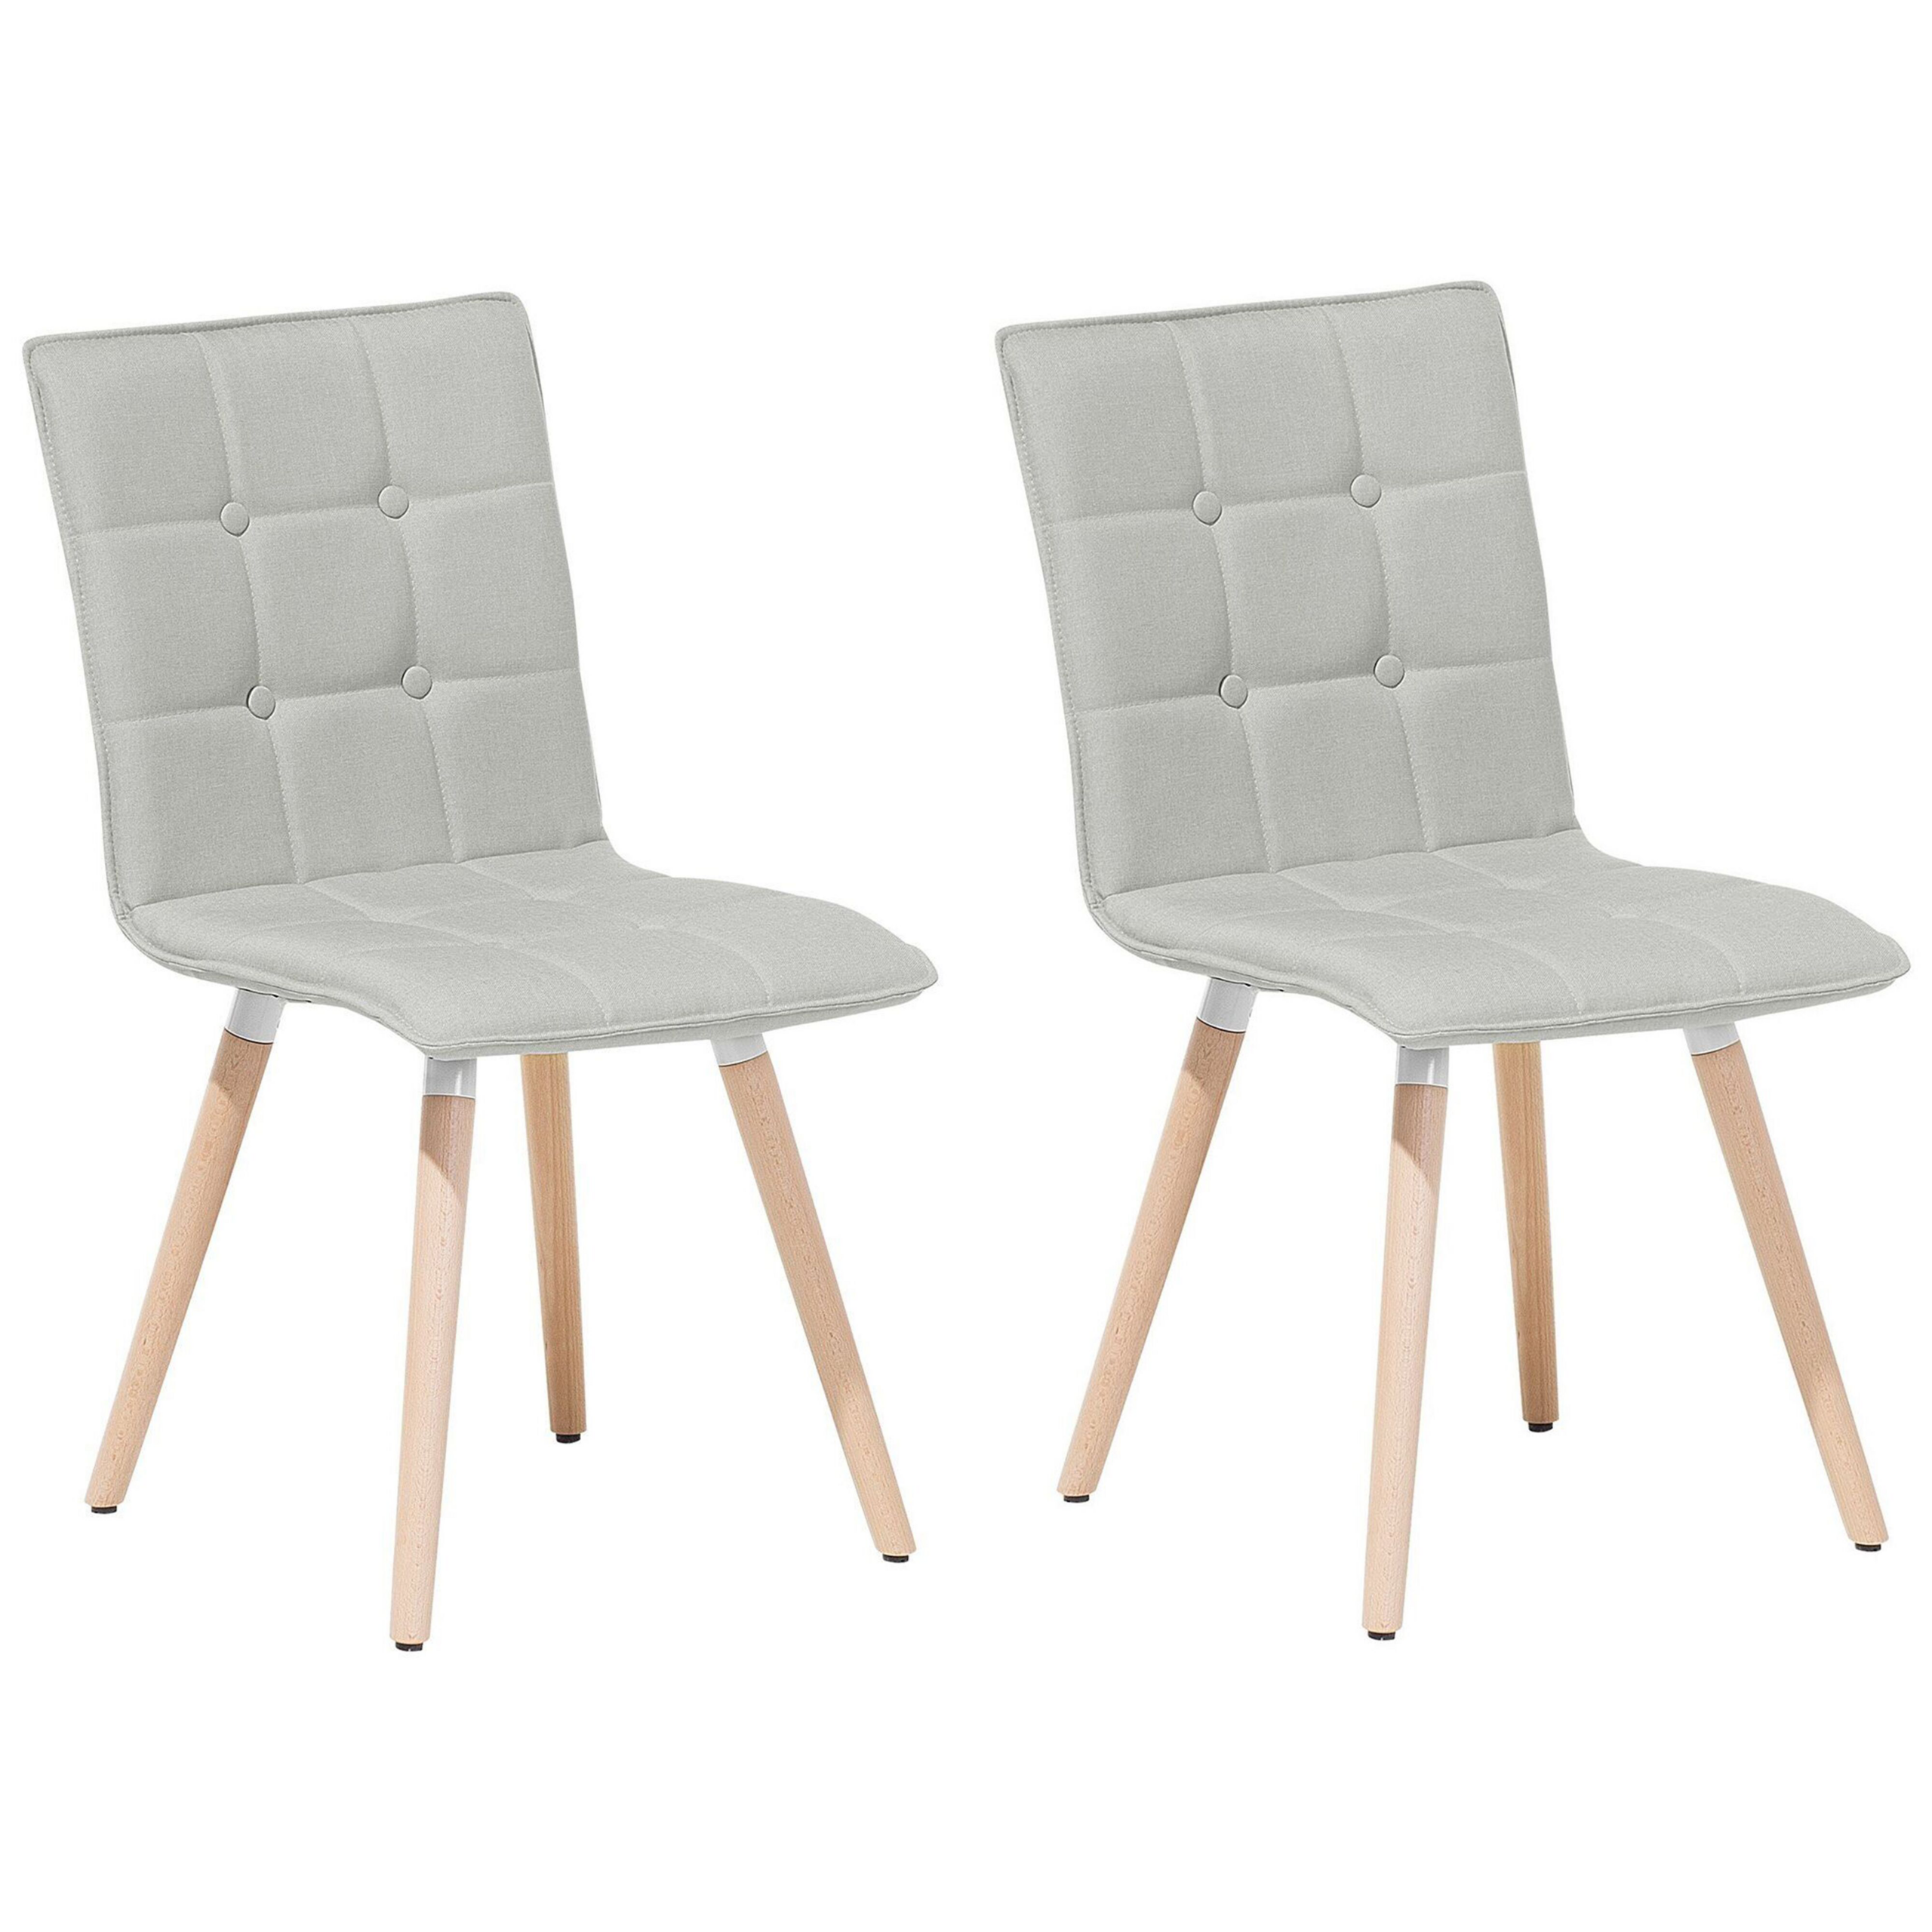 Beliani Set of 2 Dining Chairs Light Grey Fabric Upholstery Light Wood Legs Modern Eclectic Style